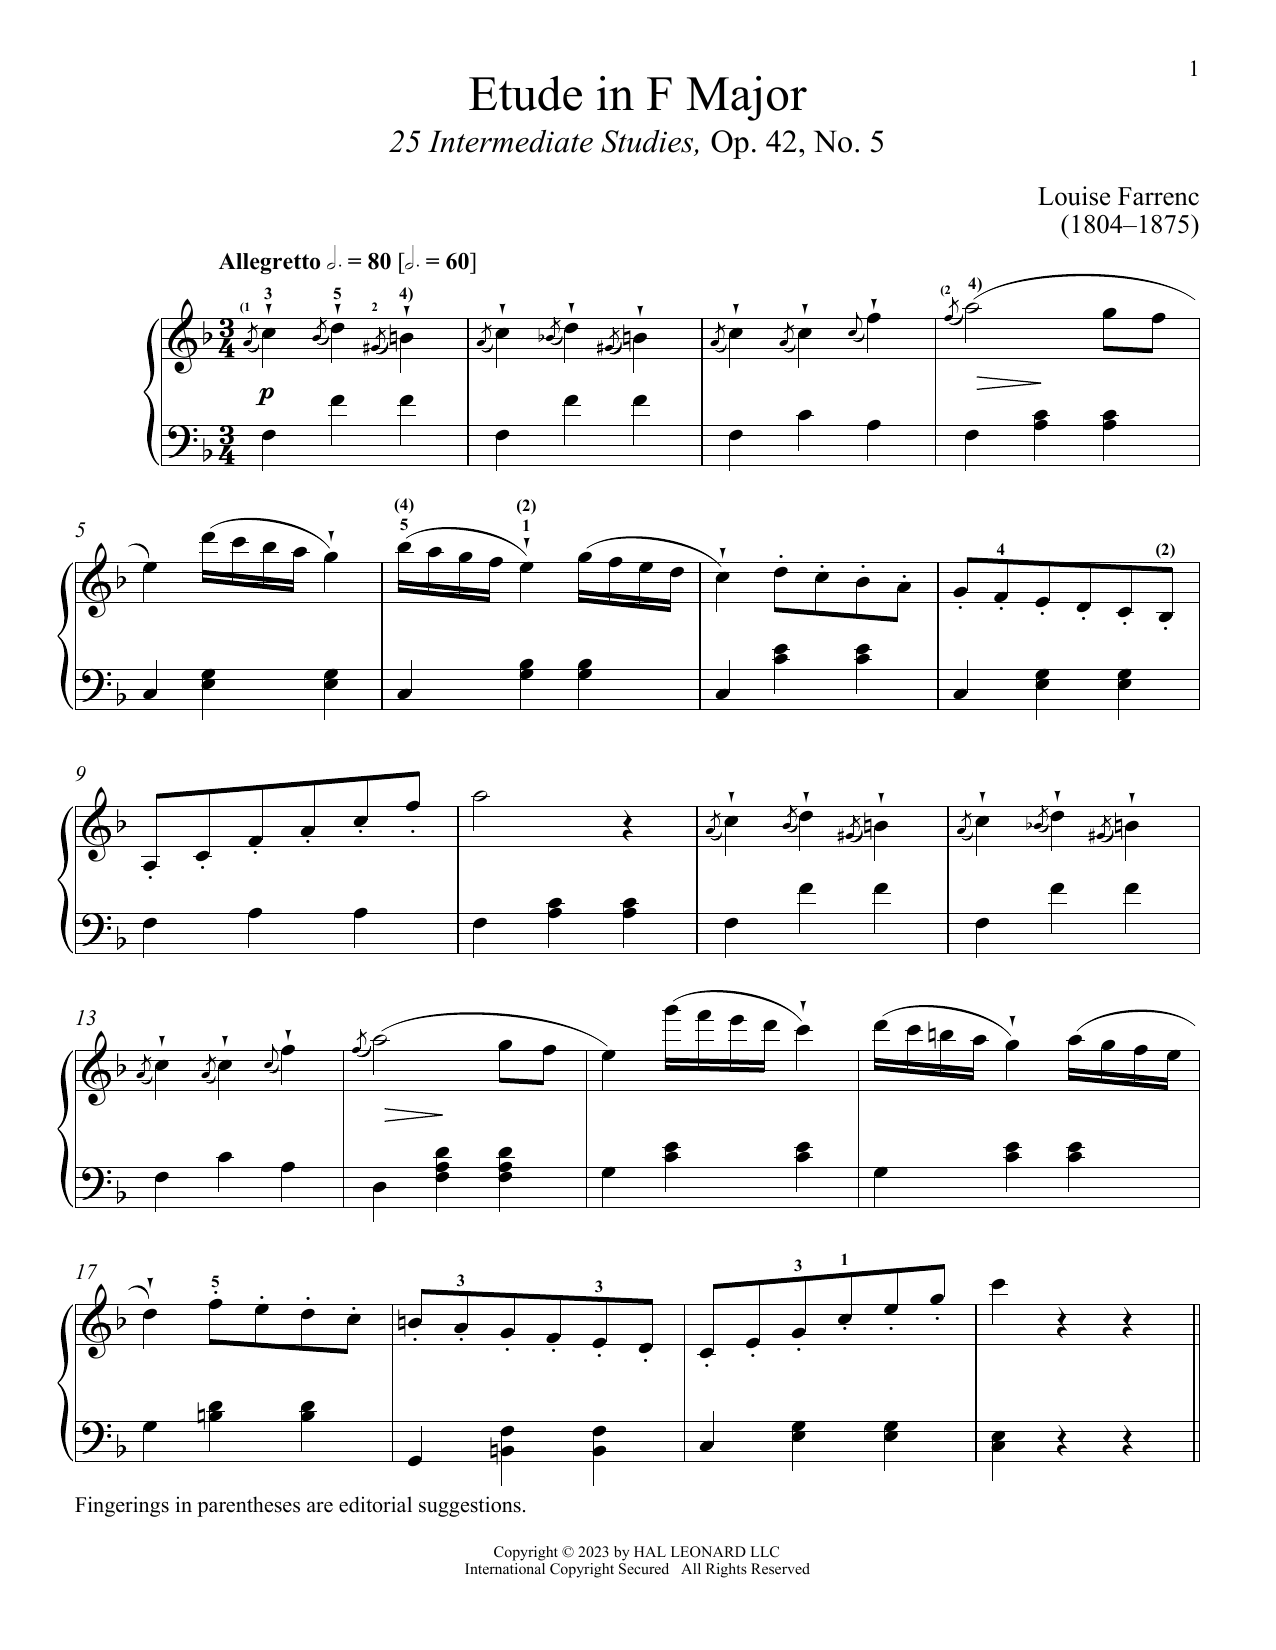 Download Louise Dumont Farrenc Etude in F Major Sheet Music